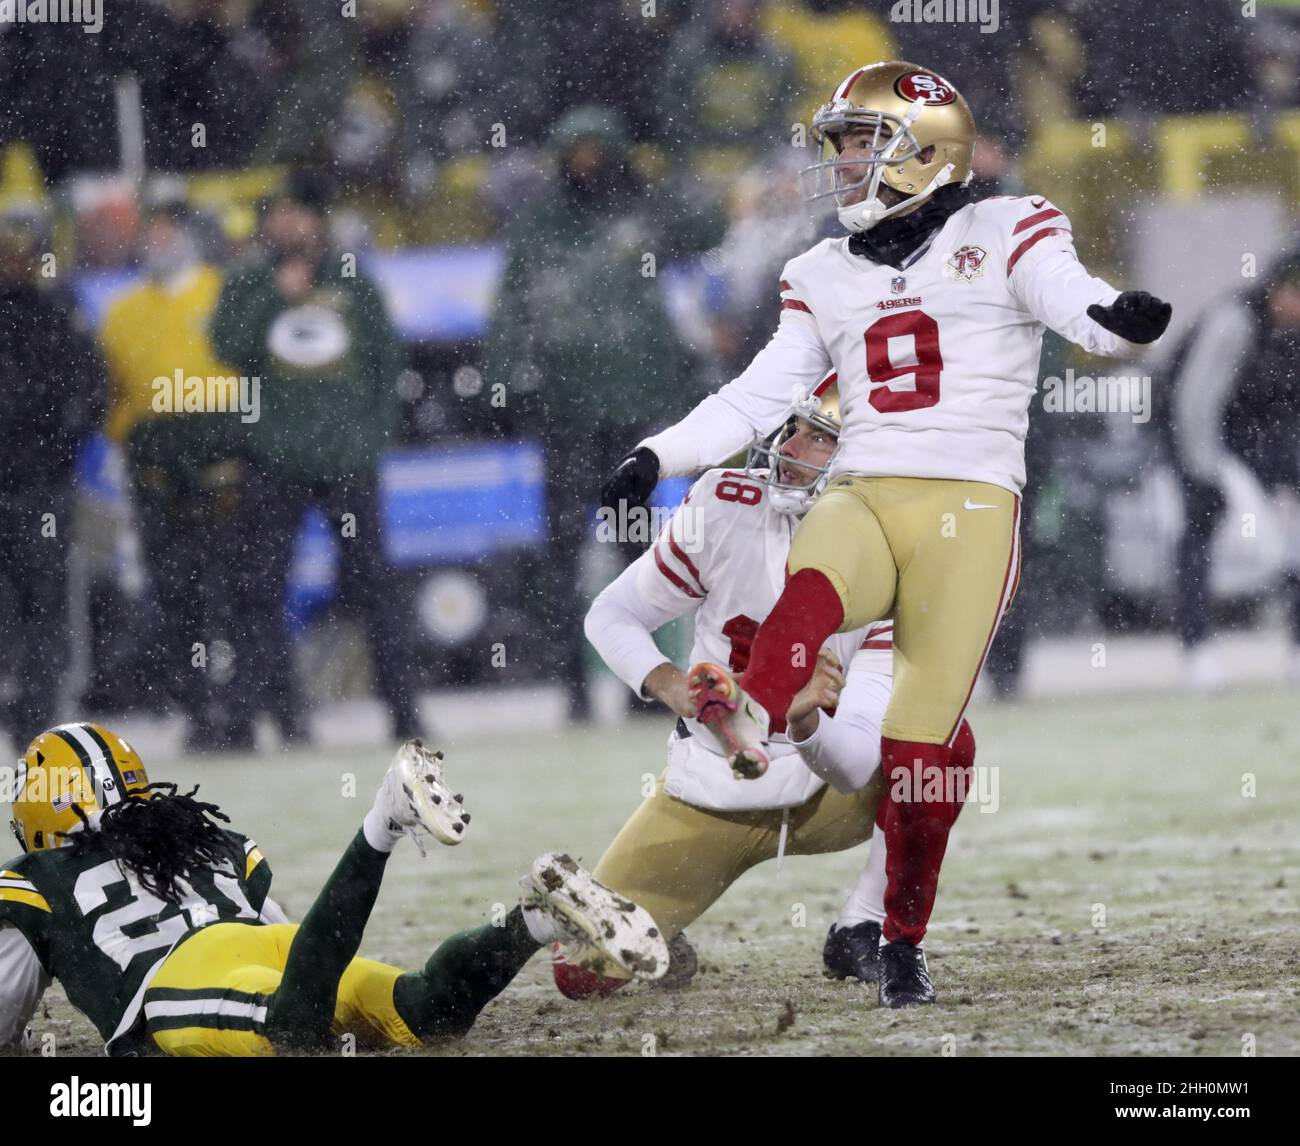 green bay 49ers game live